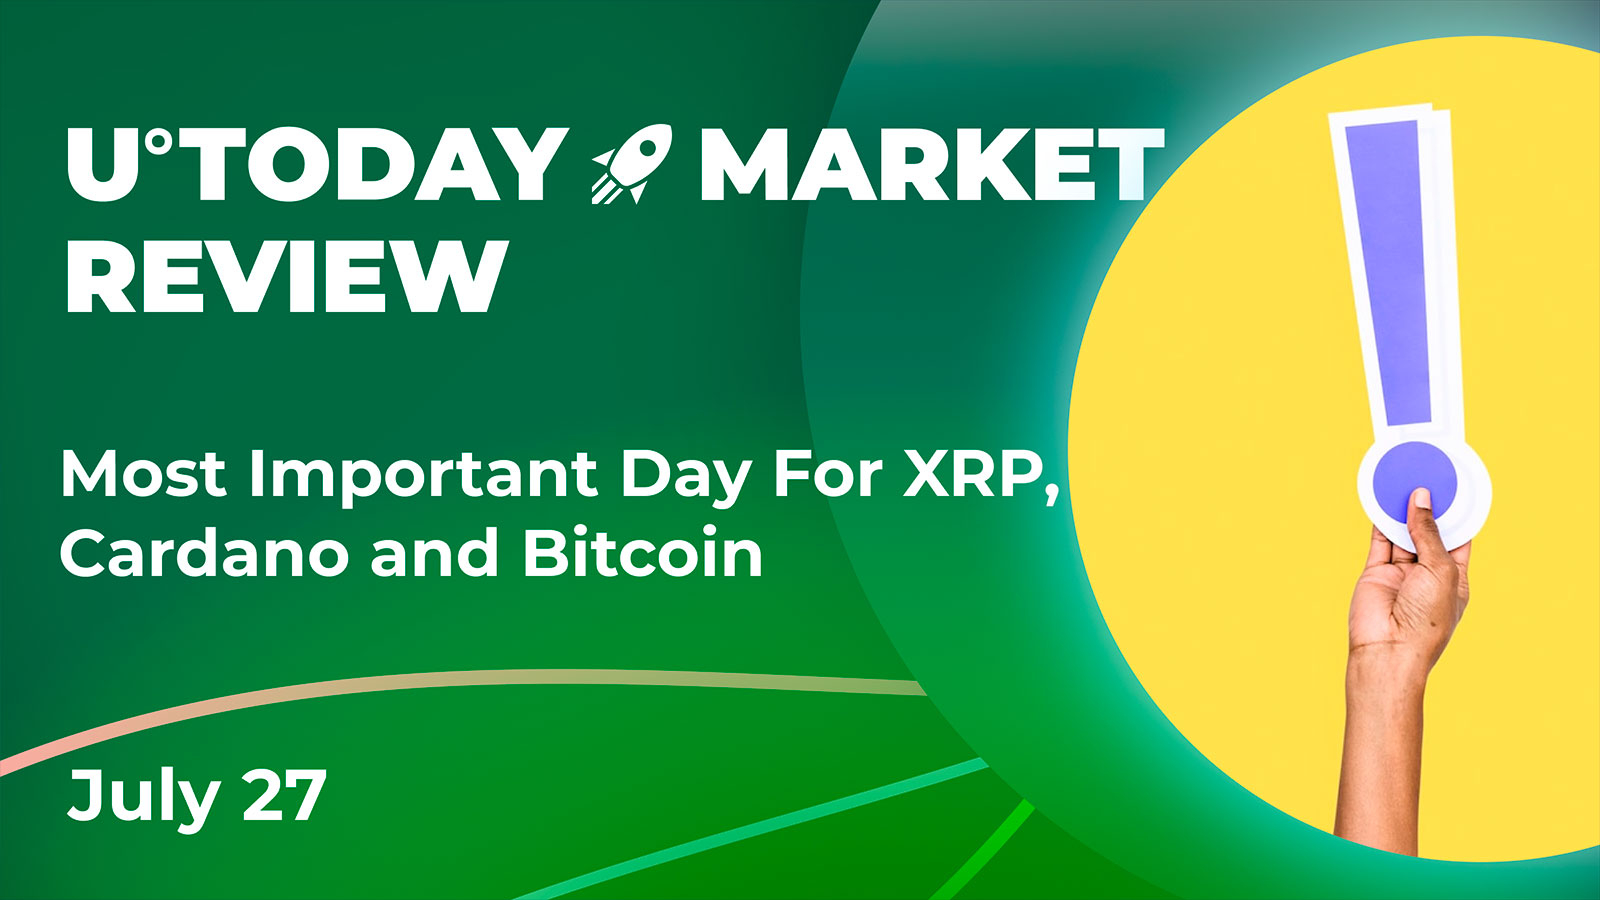 Most Important Day for XRP, Cardano and Bitcoin Could Be Today: Crypto Market Review, July 27